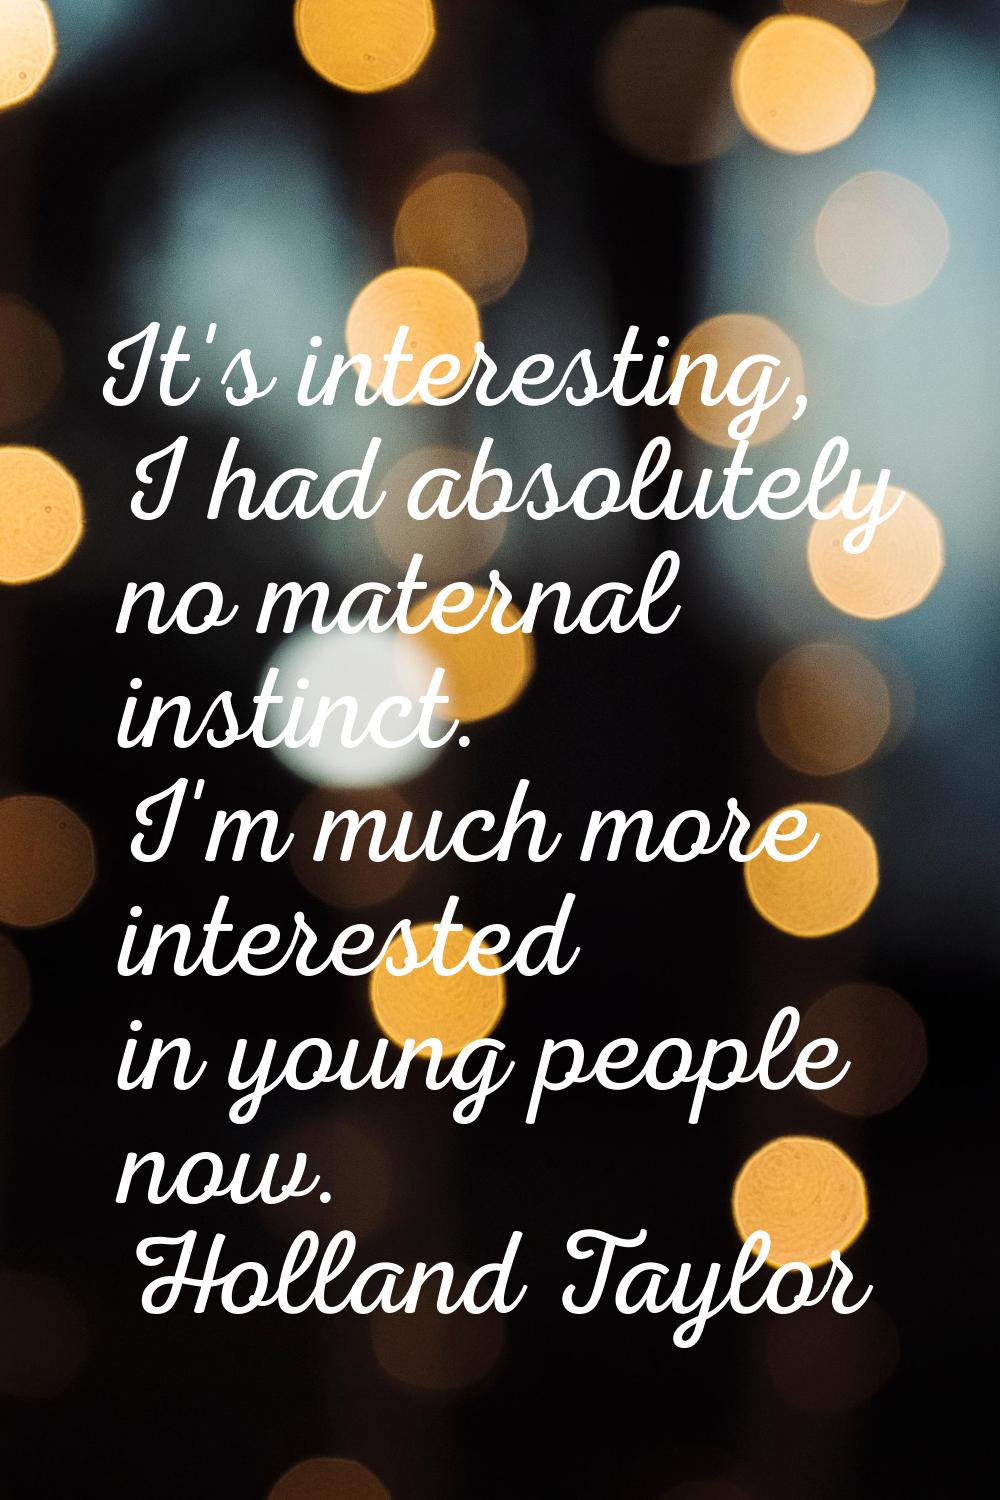 It's interesting, I had absolutely no maternal instinct. I'm much more interested in young people n